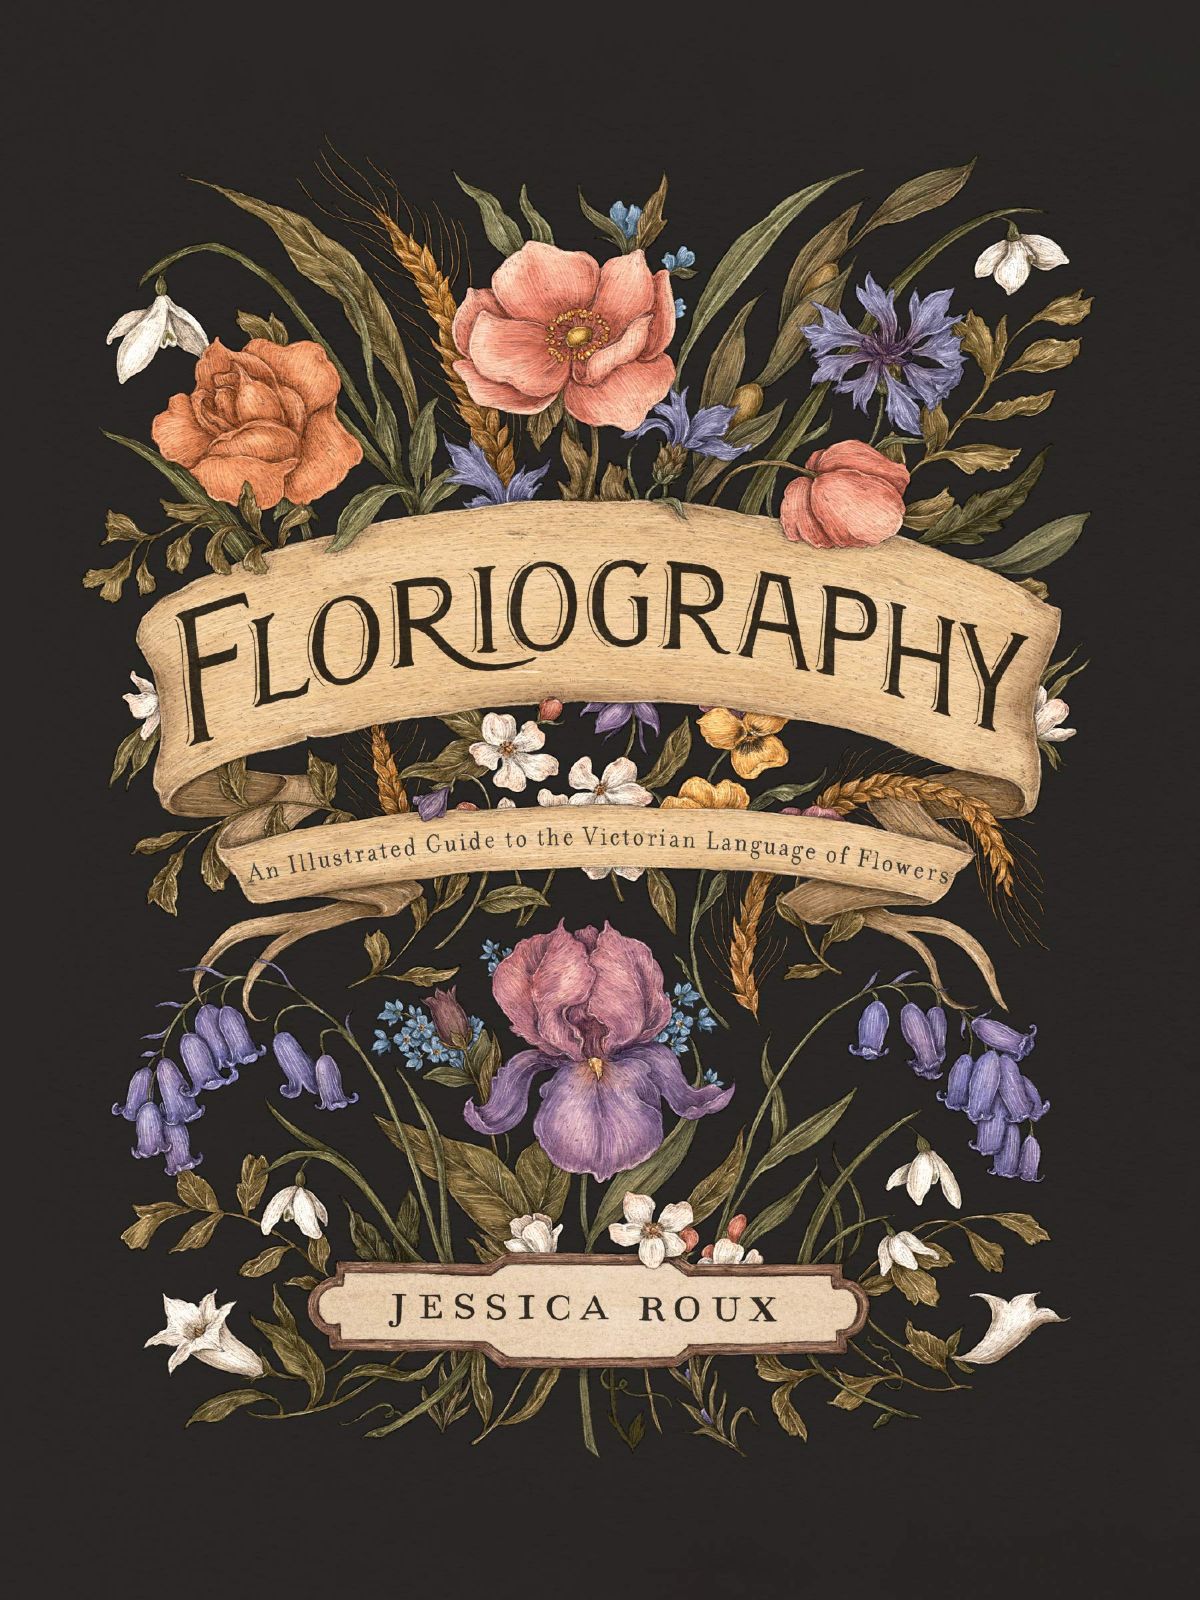 Picture of the cover of the book Floriography: An Illustrated Guide to the Victorian Language of Flowers by Jessica Roux